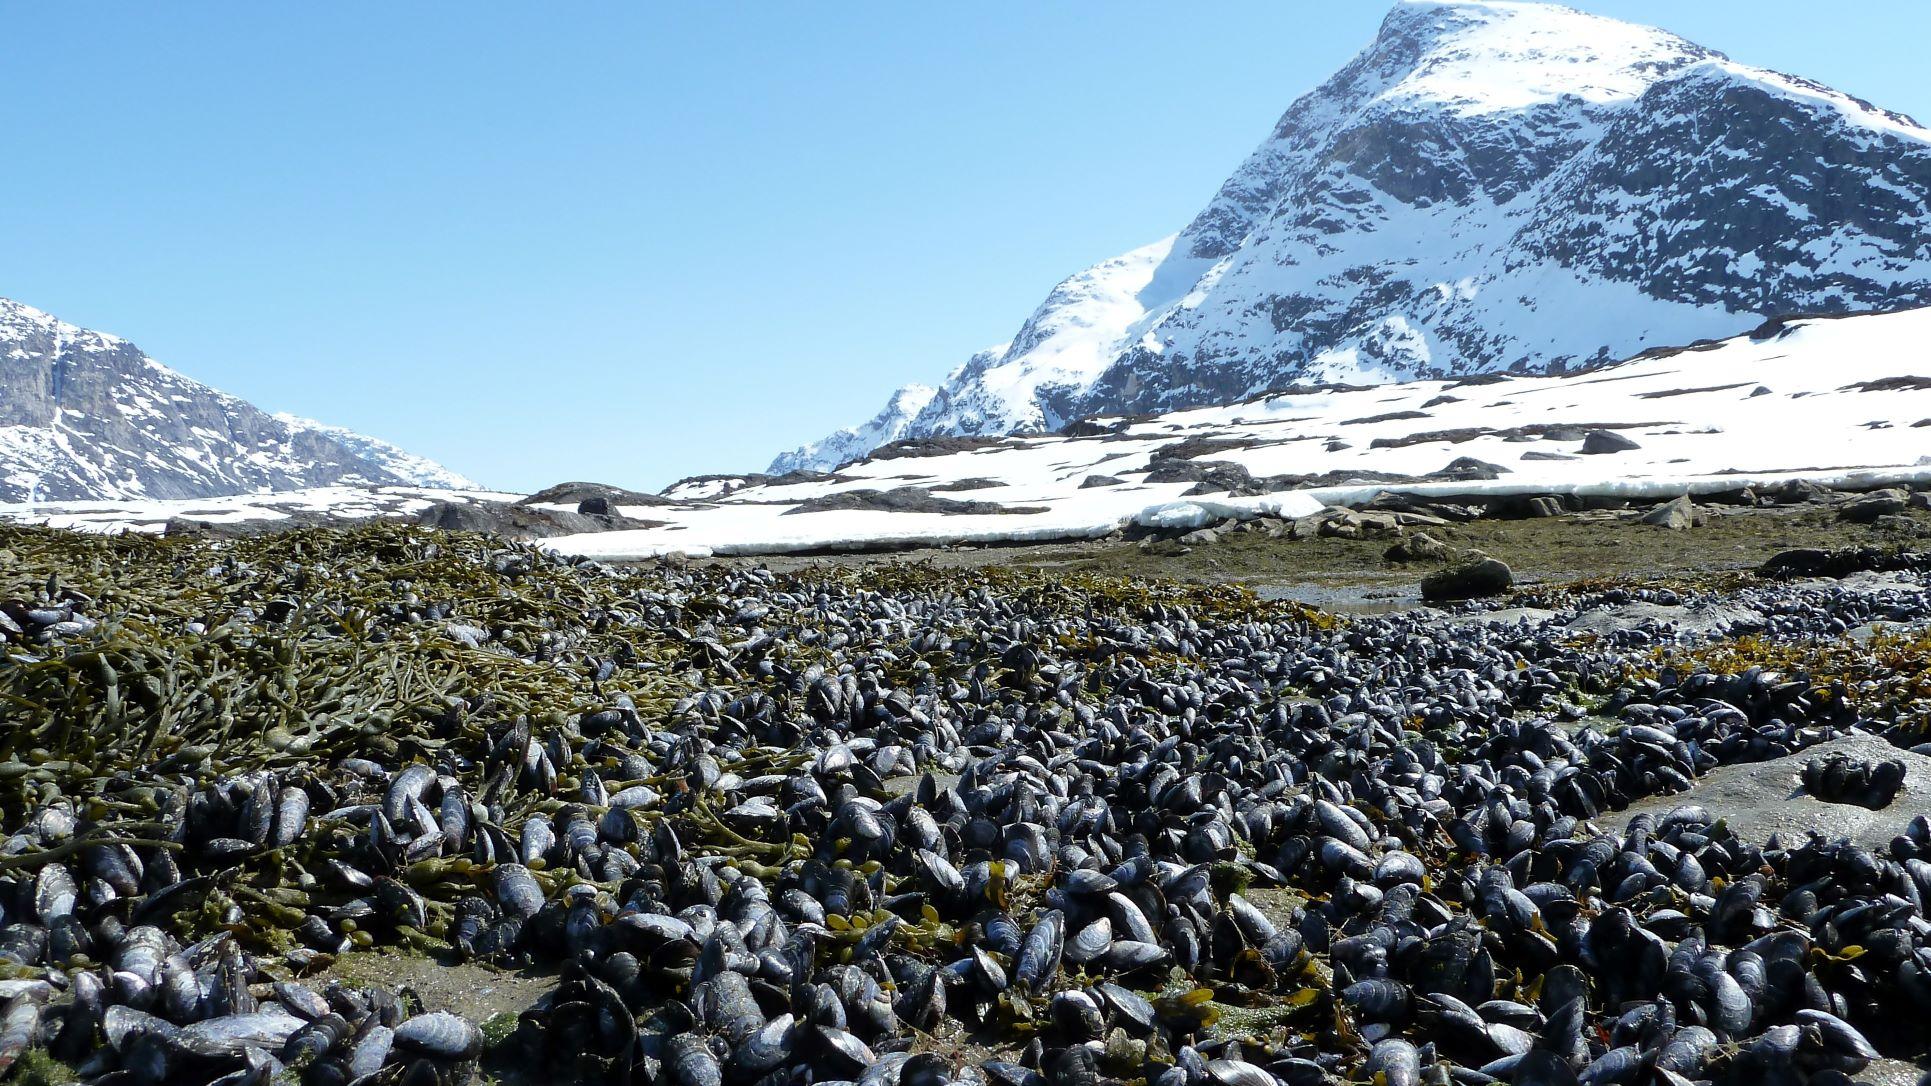 Photo of mussels along shoreline with snow covered mountains in background